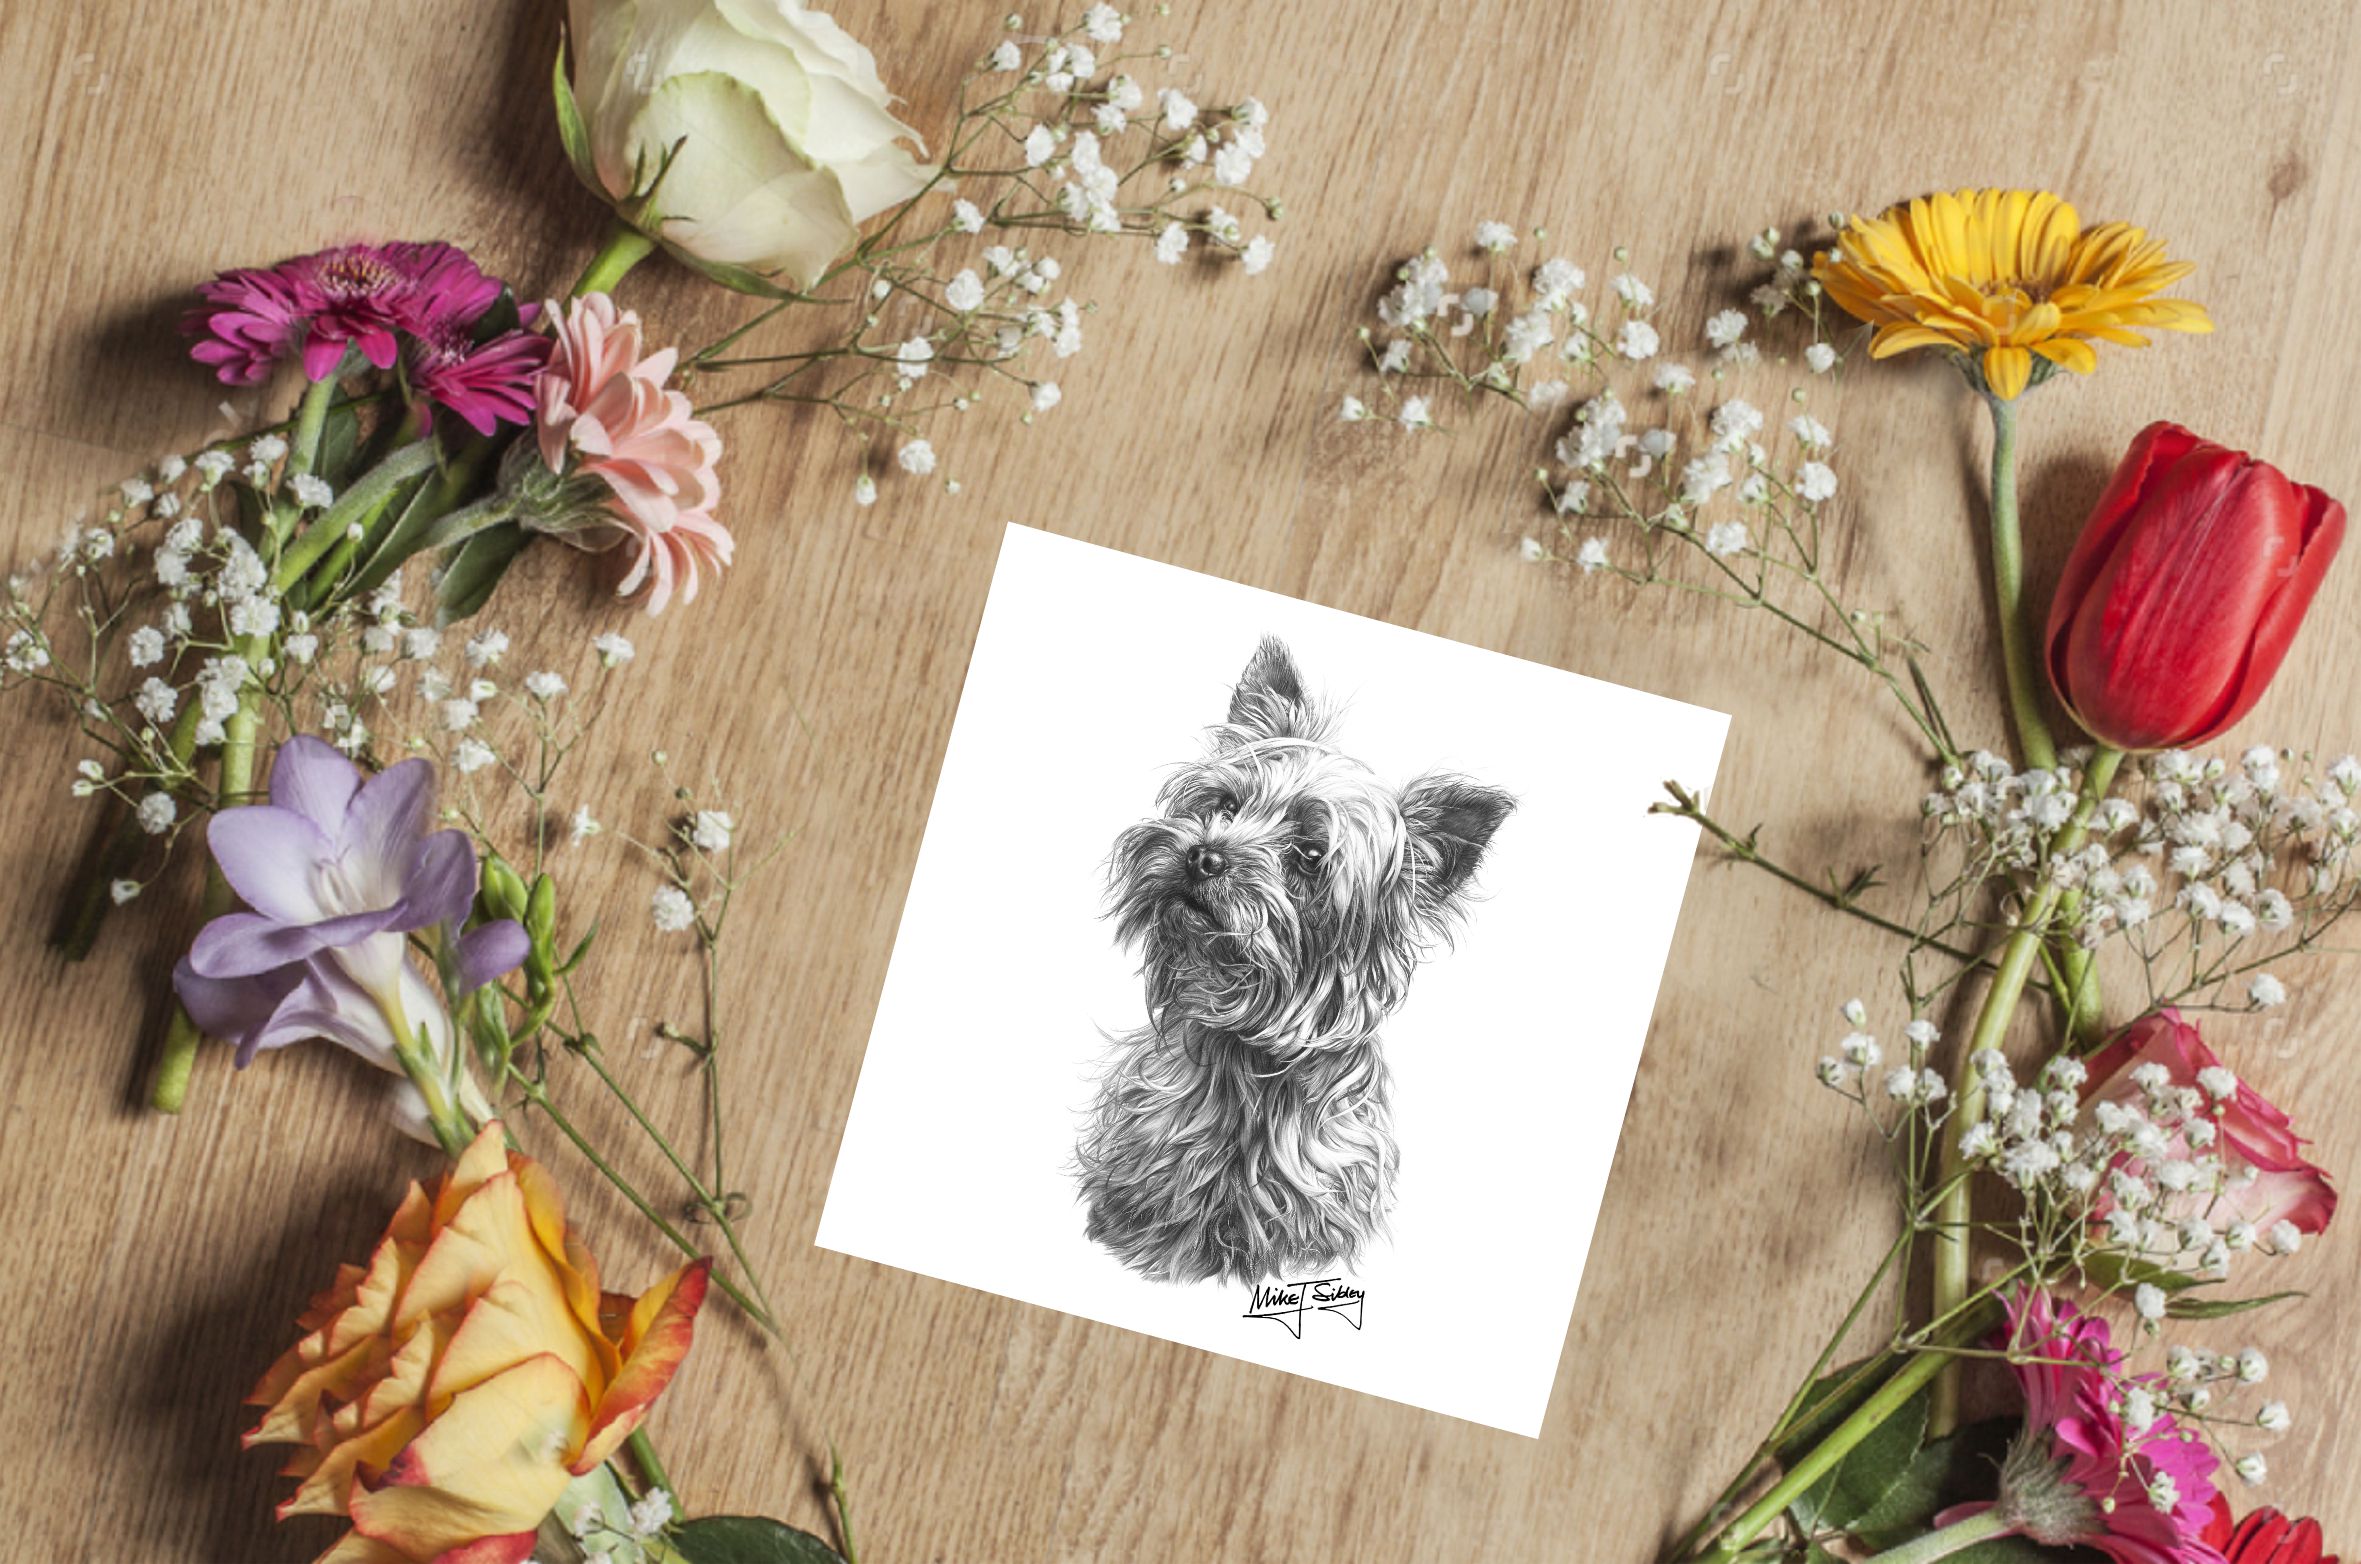 Mike Sibley Yorkshire Terrier Dog Breed Blank Greetings Card for all occasions 